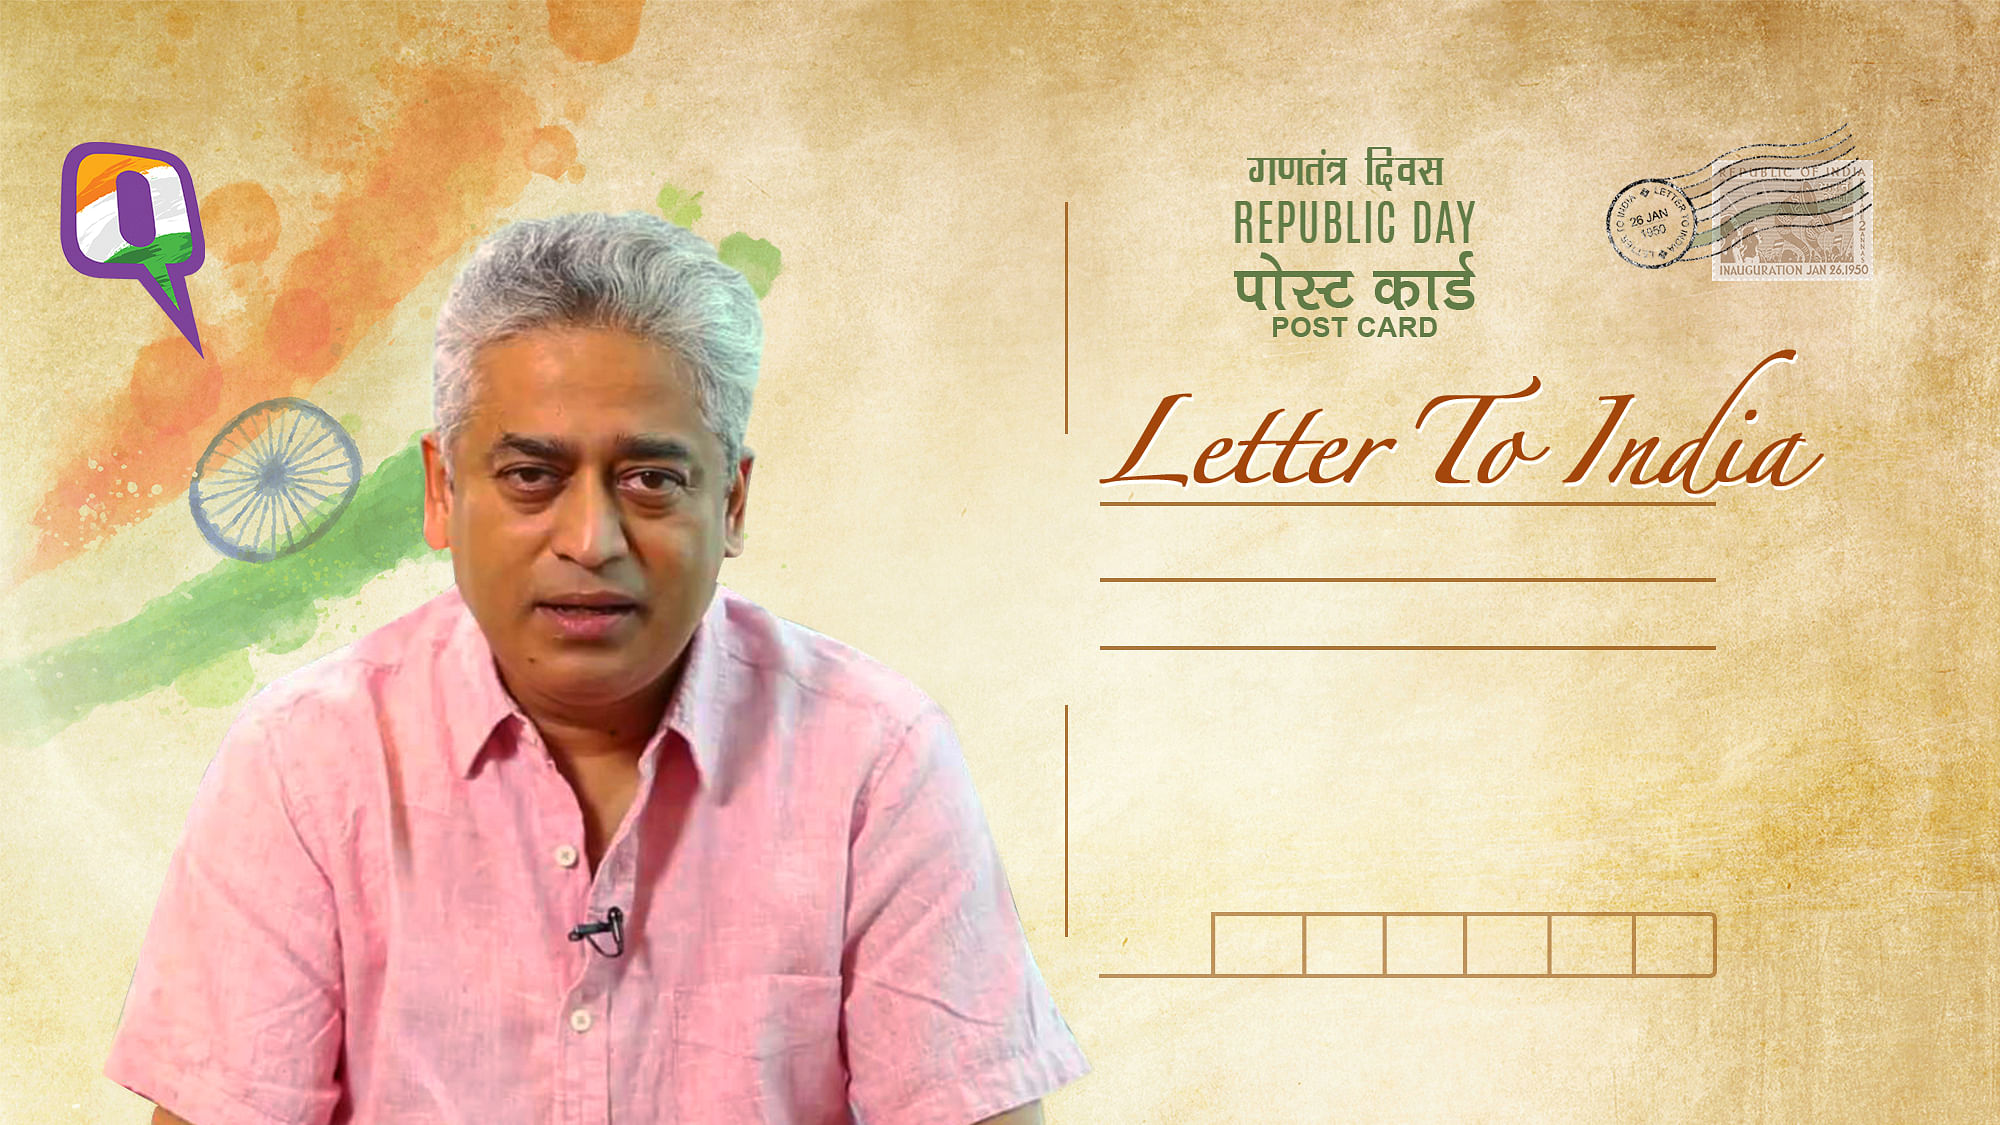 Rajdeep Sardesai believes that to be a good Indian, you simply have to be committed to the idea of a better future. (Photo: <b>The Quint</b>/Rhythum Seth)